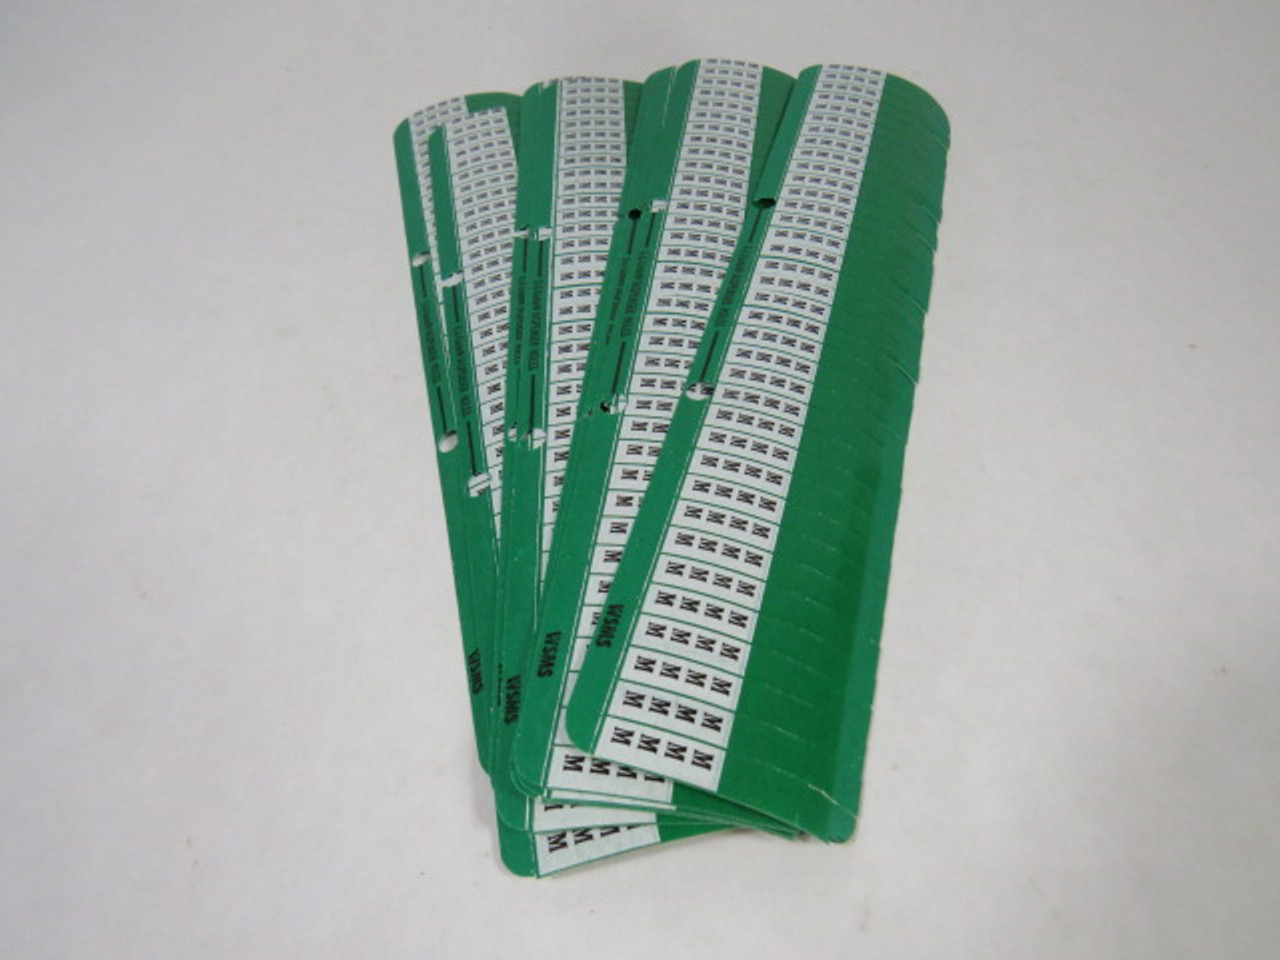 Thomas & Betts M Green E-Z-Code Wire Markers Lot of 8 ! NEW !